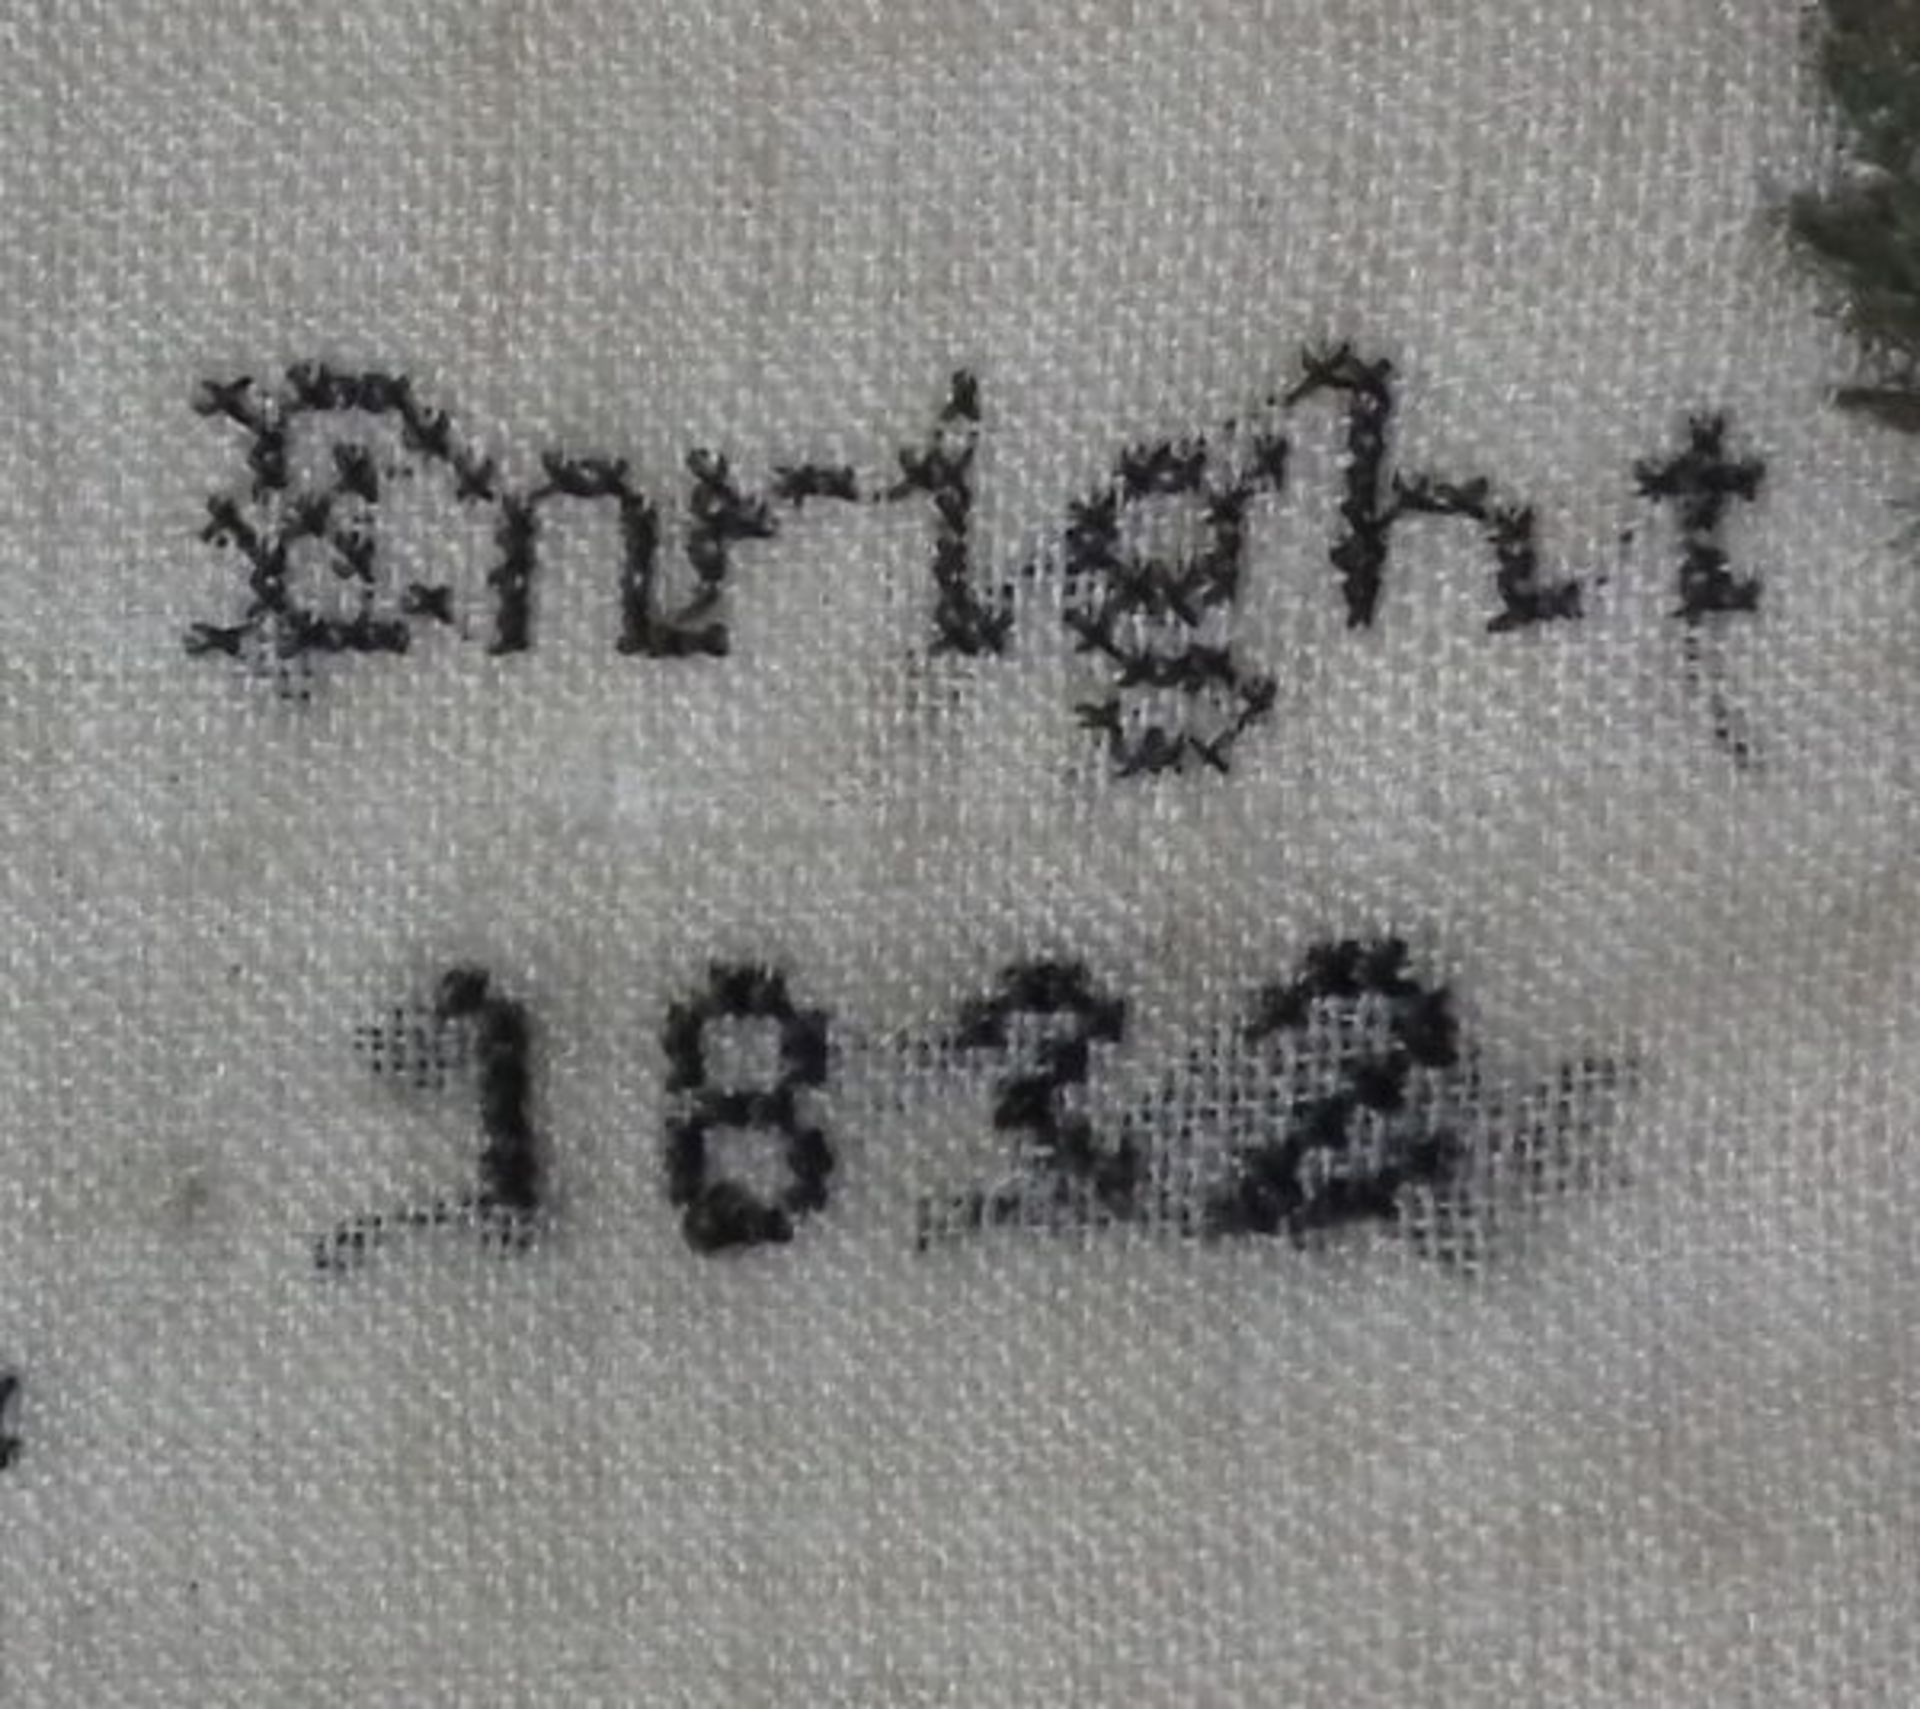 Irish Needlework Sampler dated 1832 by Mary Anne Enright FREE UK DELIVERY - Image 12 of 38